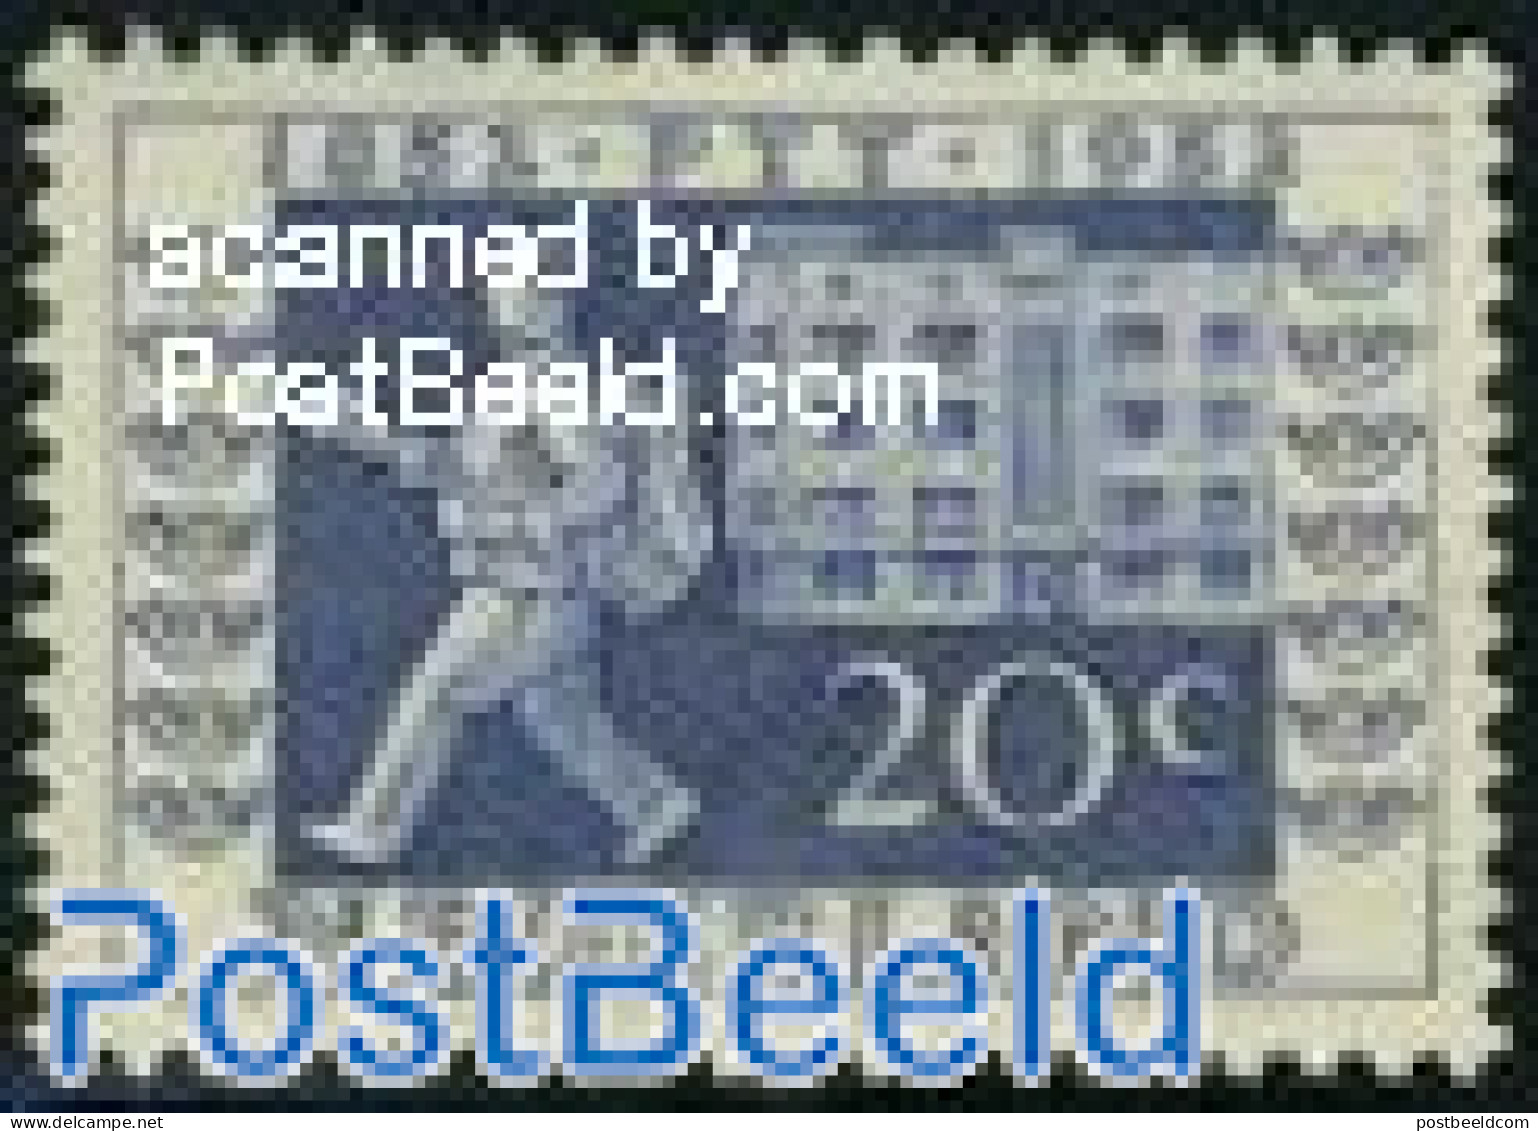 Netherlands 1952 20c Post In 1952, Stamp Out Of Set, Unused (hinged) - Neufs